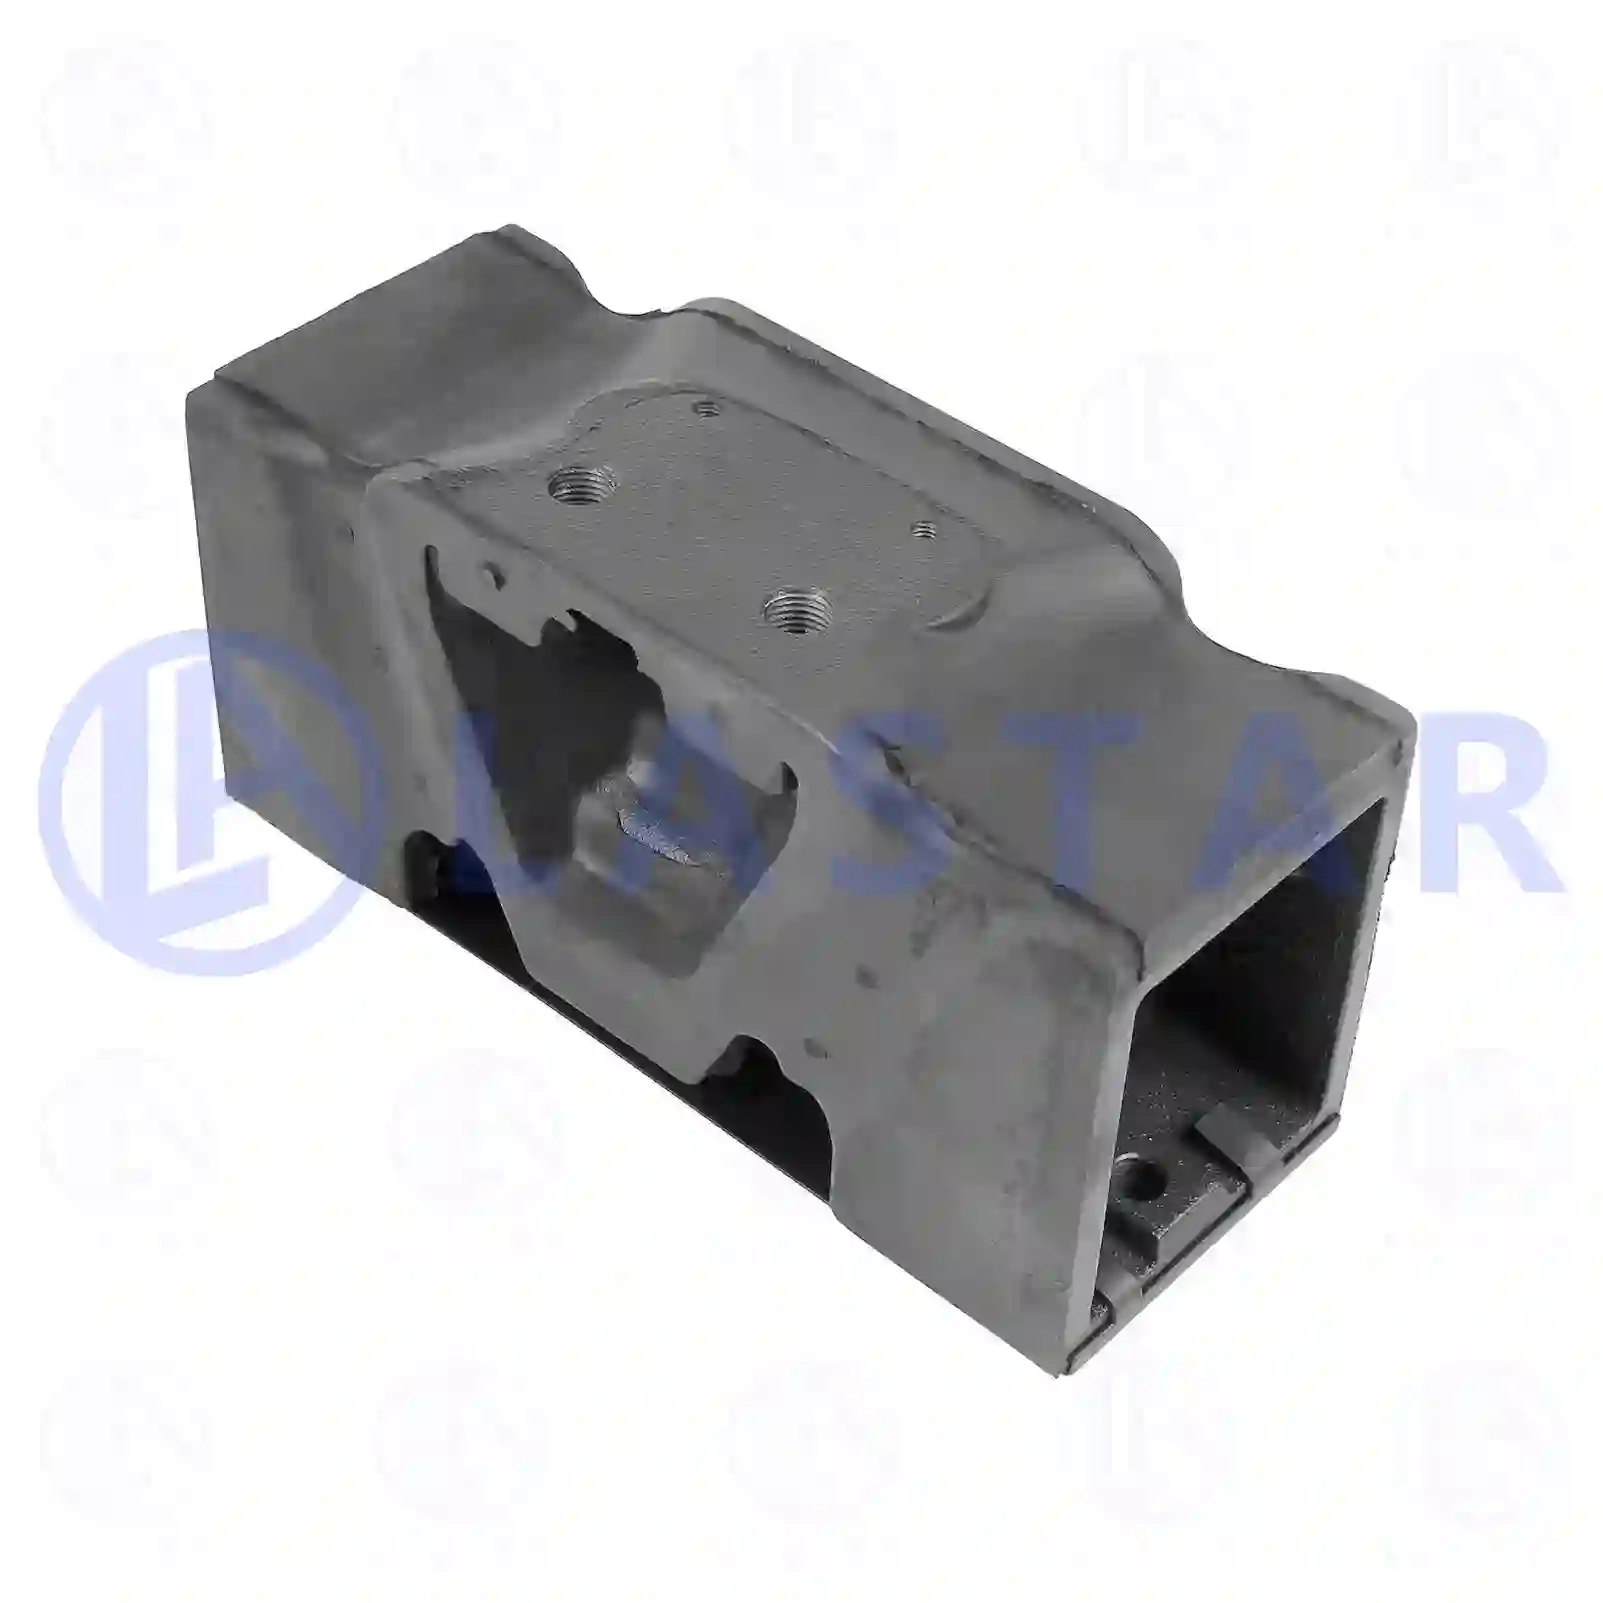 Engine mounting, 77704384, 81962100367, , , , , ||  77704384 Lastar Spare Part | Truck Spare Parts, Auotomotive Spare Parts Engine mounting, 77704384, 81962100367, , , , , ||  77704384 Lastar Spare Part | Truck Spare Parts, Auotomotive Spare Parts